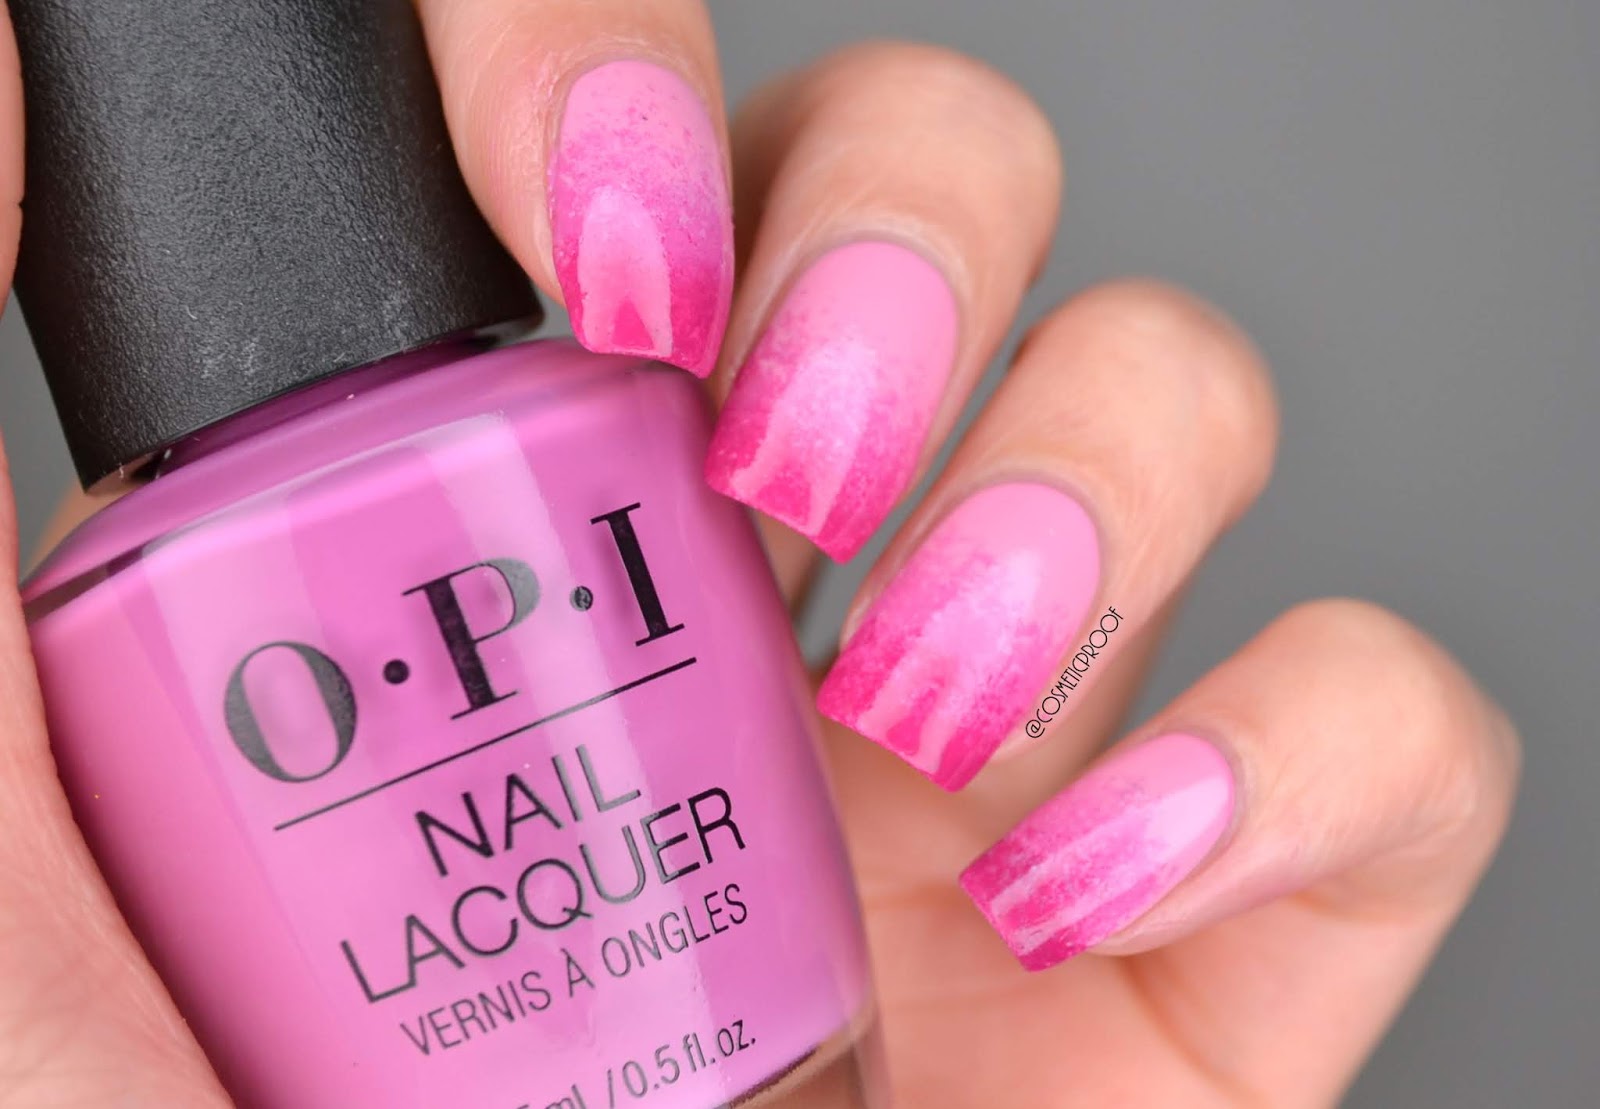 6. Purple and Pink Gradient Nail Art Design on Tumblr - wide 2